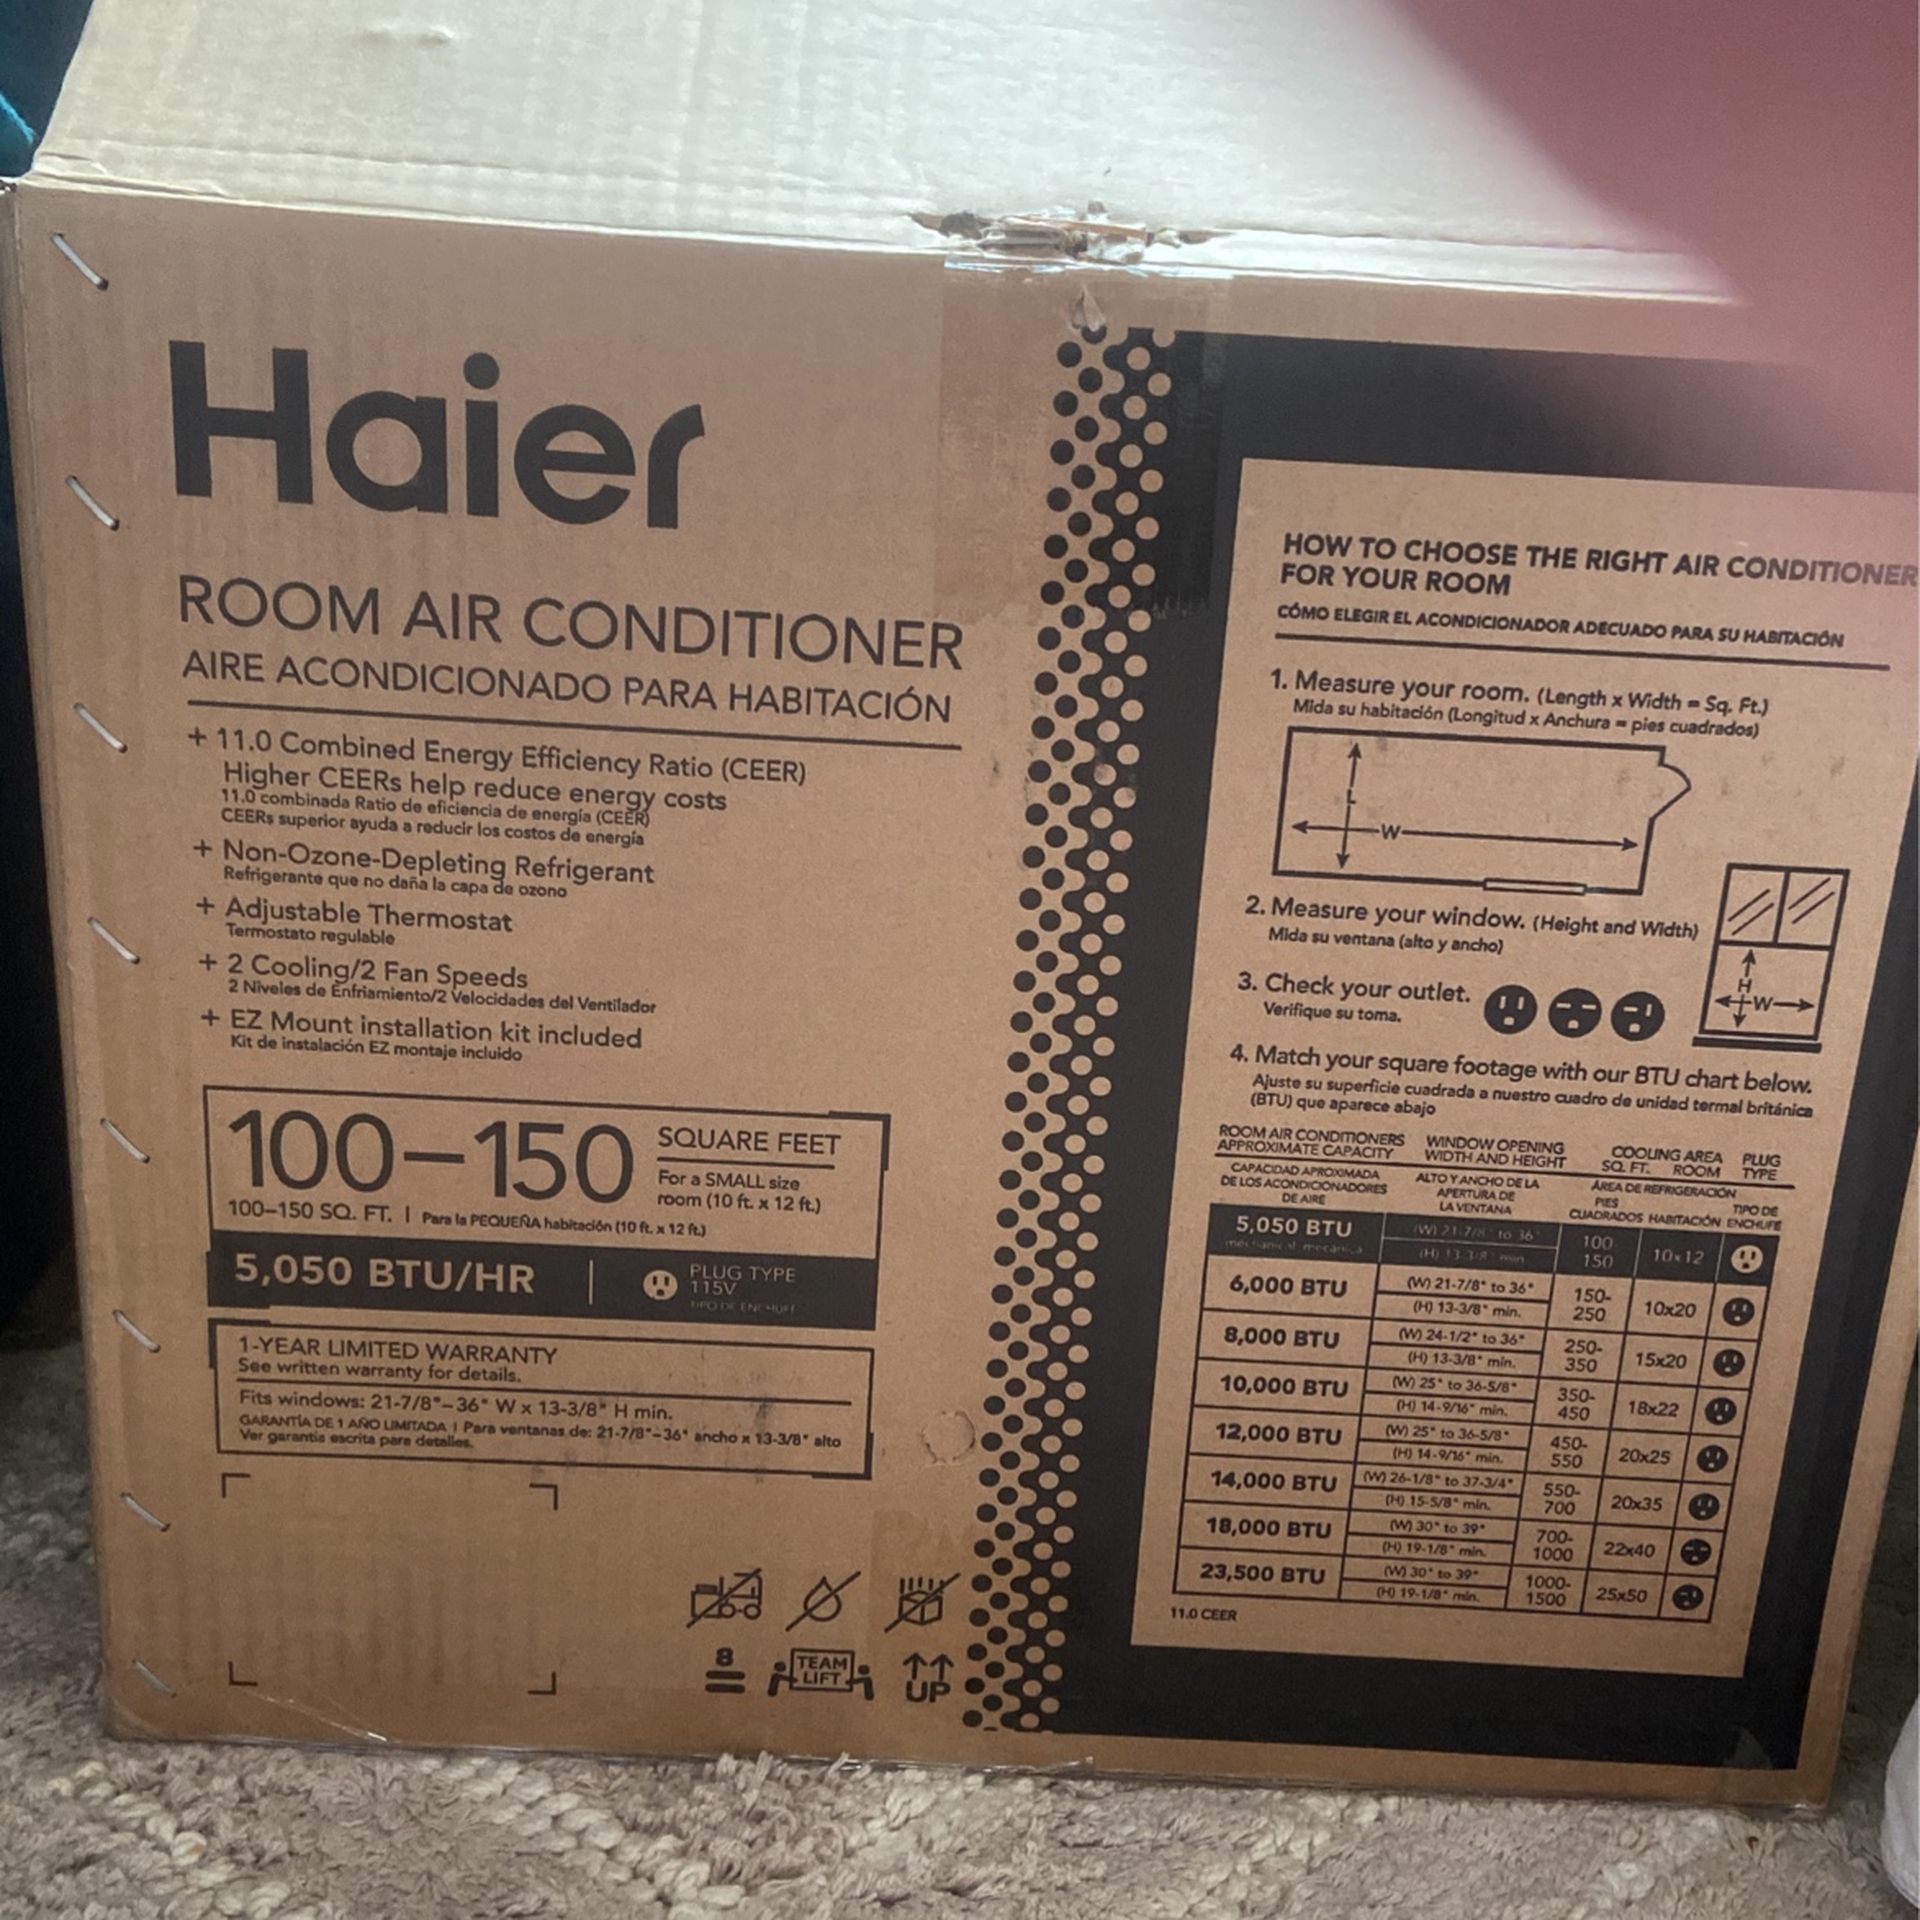 Haier Room Air Conditioner Brand New Doesn't Fit In My Window Still Got The Box 